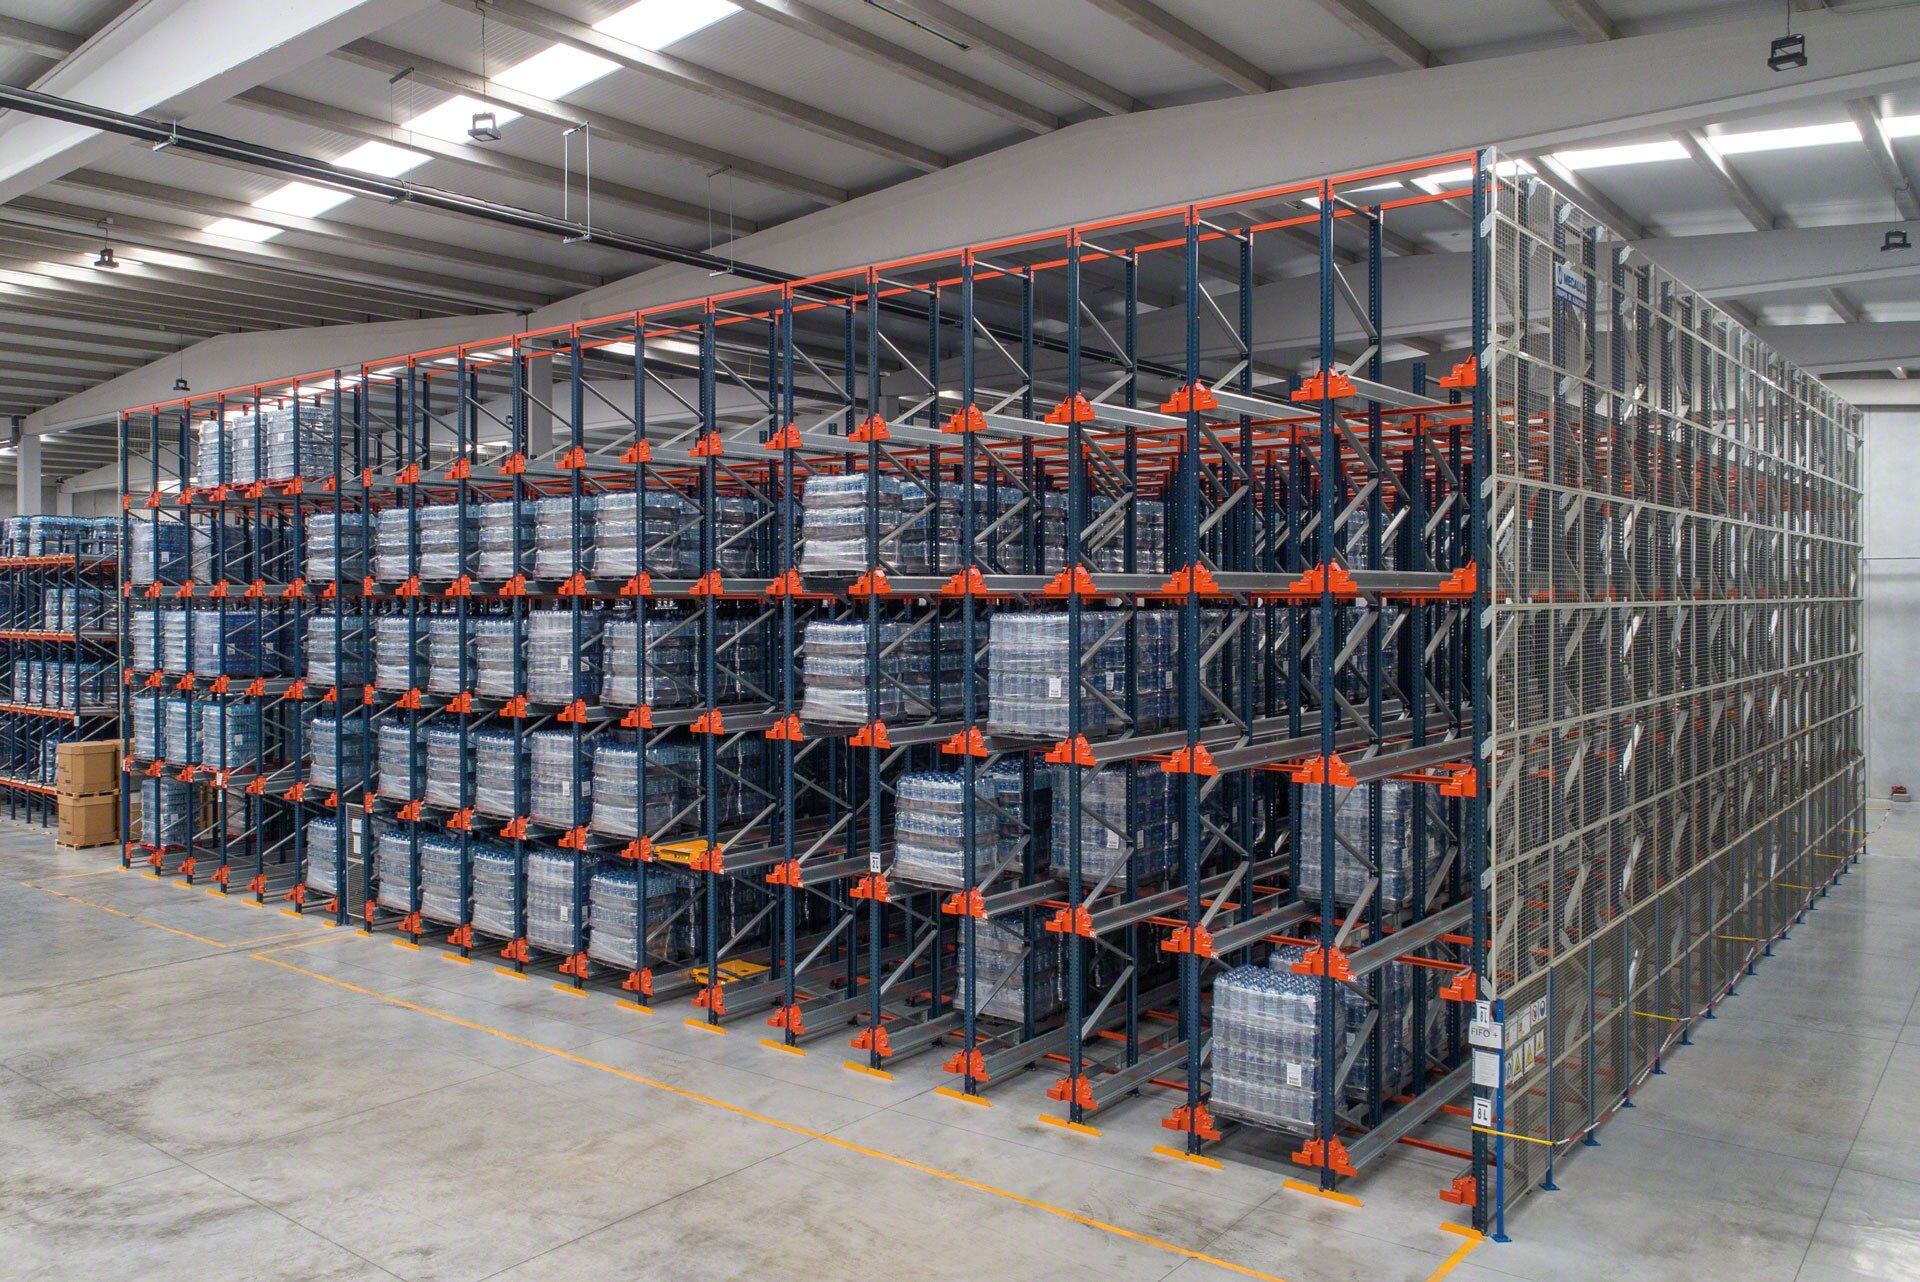 Handling equipment places the Pallet Shuttle in the storage channels